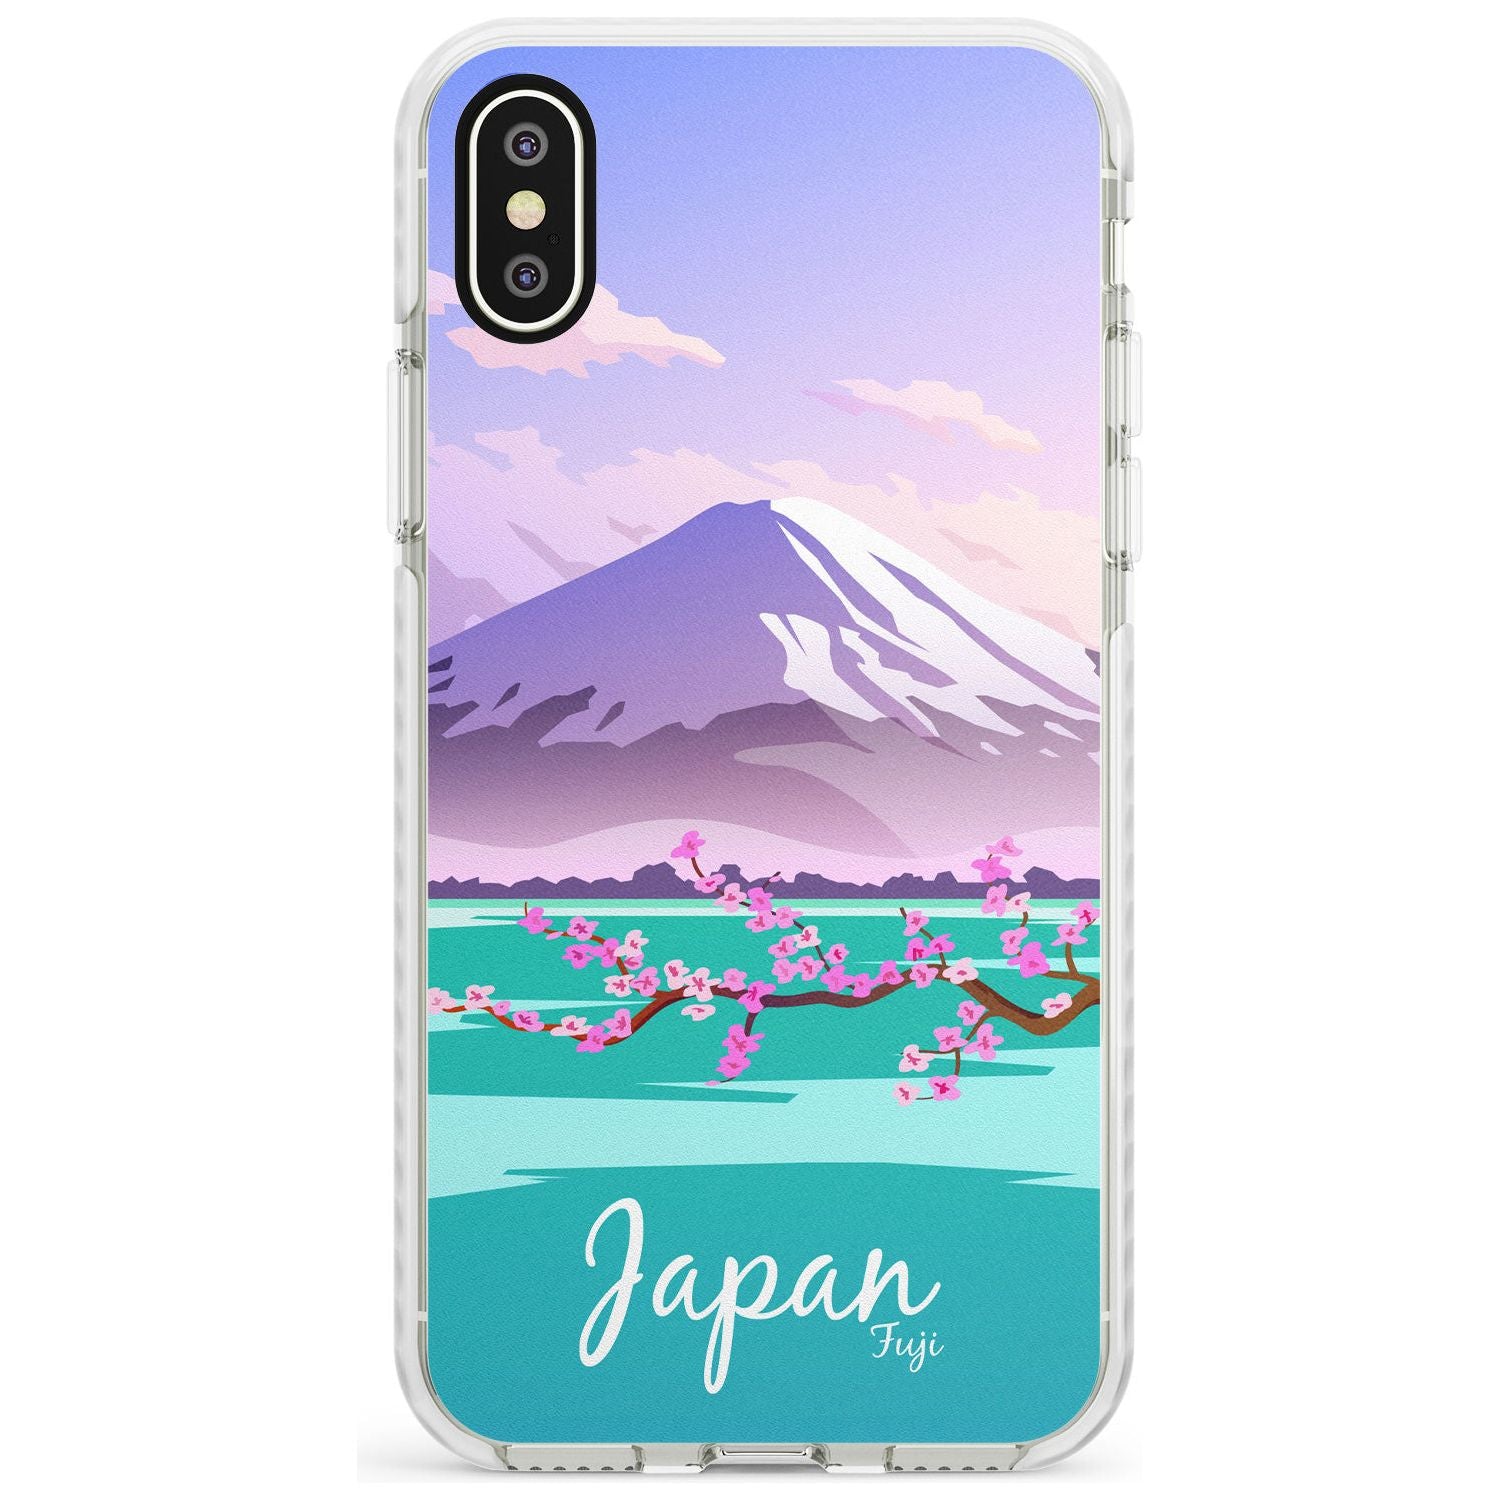 Vintage Travel Poster Japan Impact Phone Case for iPhone X XS Max XR